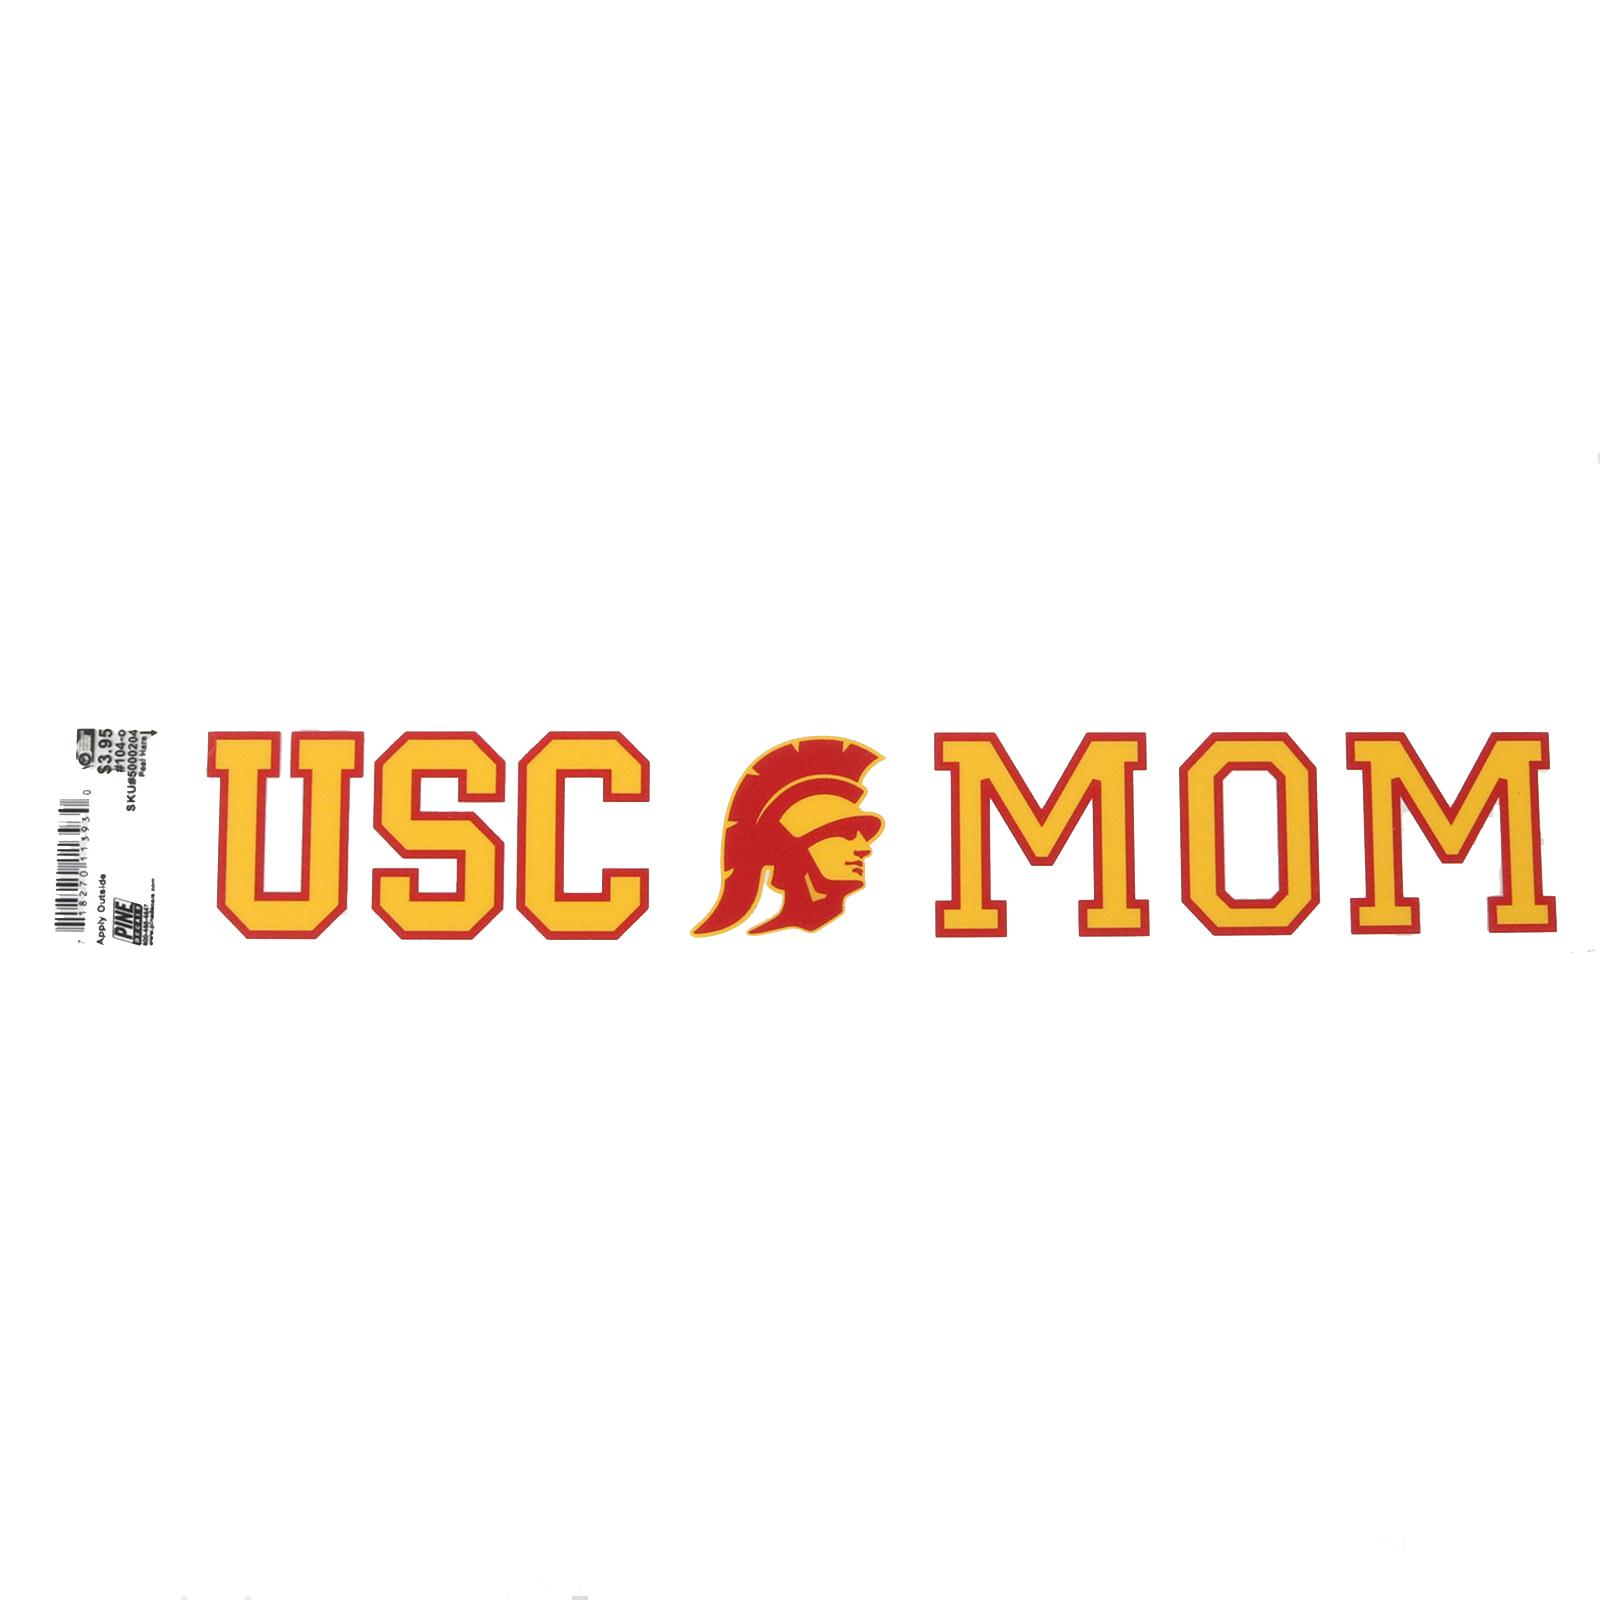 USC Tommy Head Mom Outside Strip Decal image01